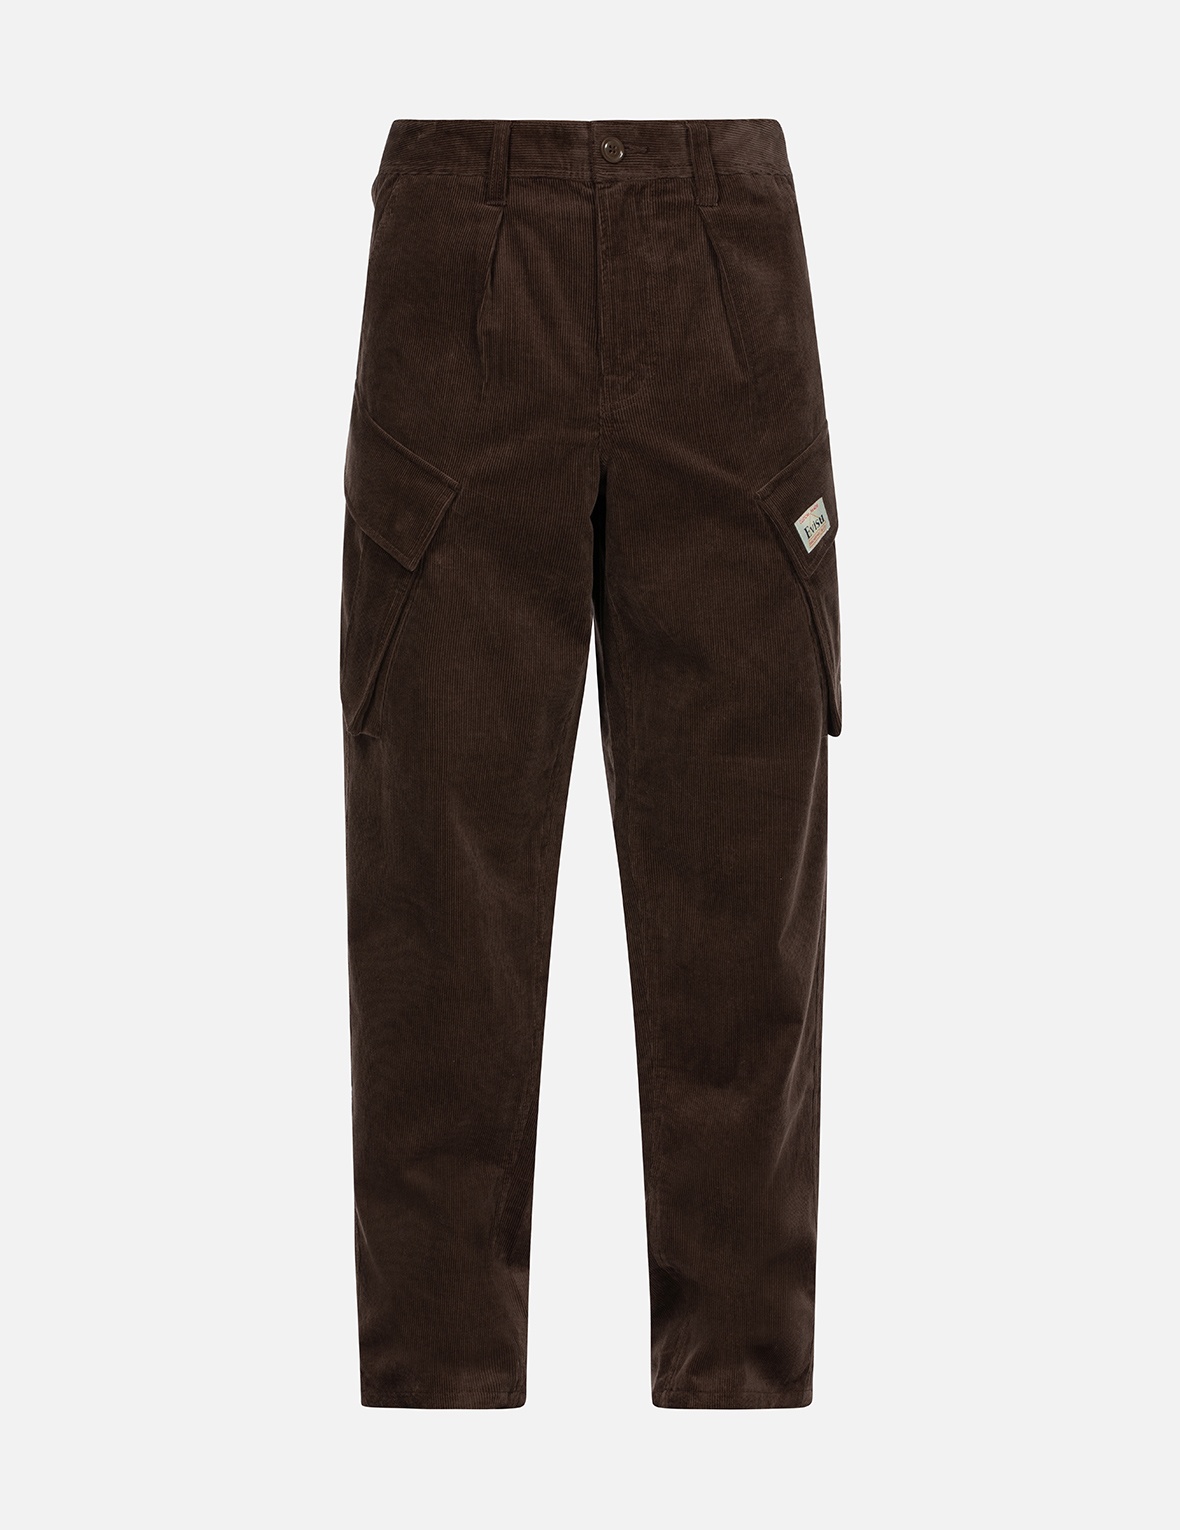 LOGO AND SEAGULL EMBROIDERY RELAX FIT CORDUROY PANTS - 2